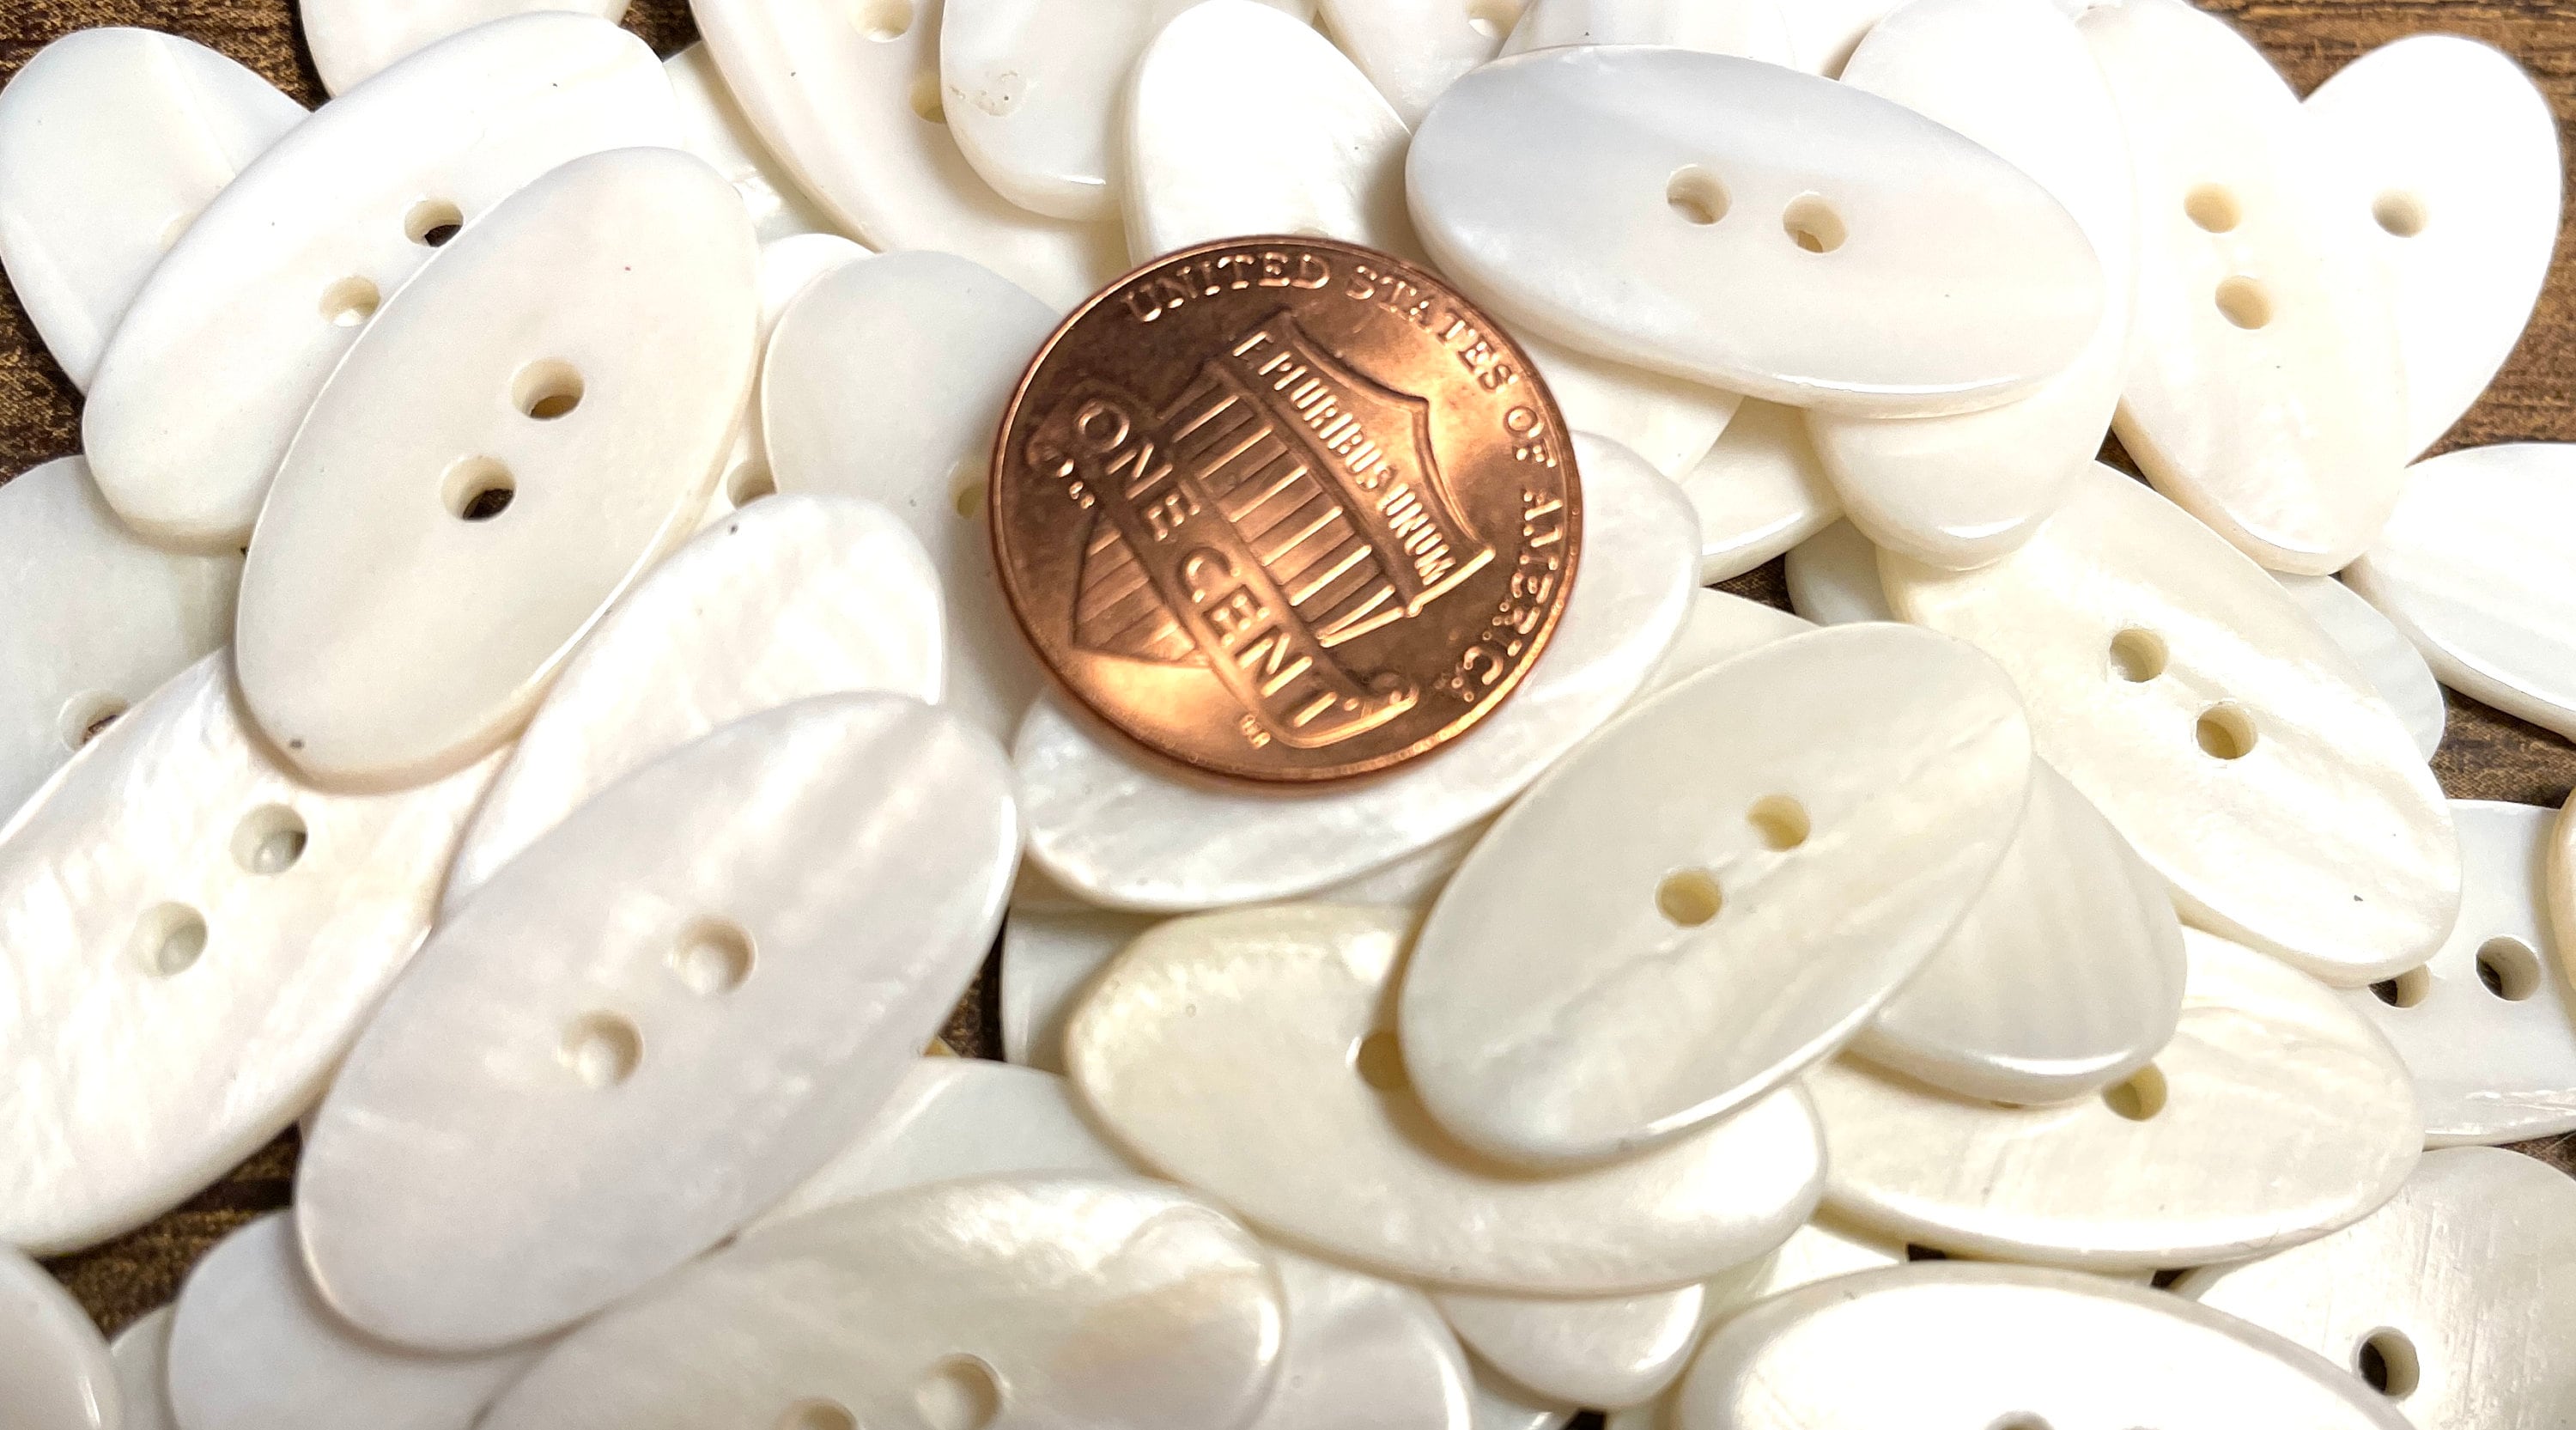 Giant WHITE Buttons, Giant Plastic Buttons 5cm, Extra Large